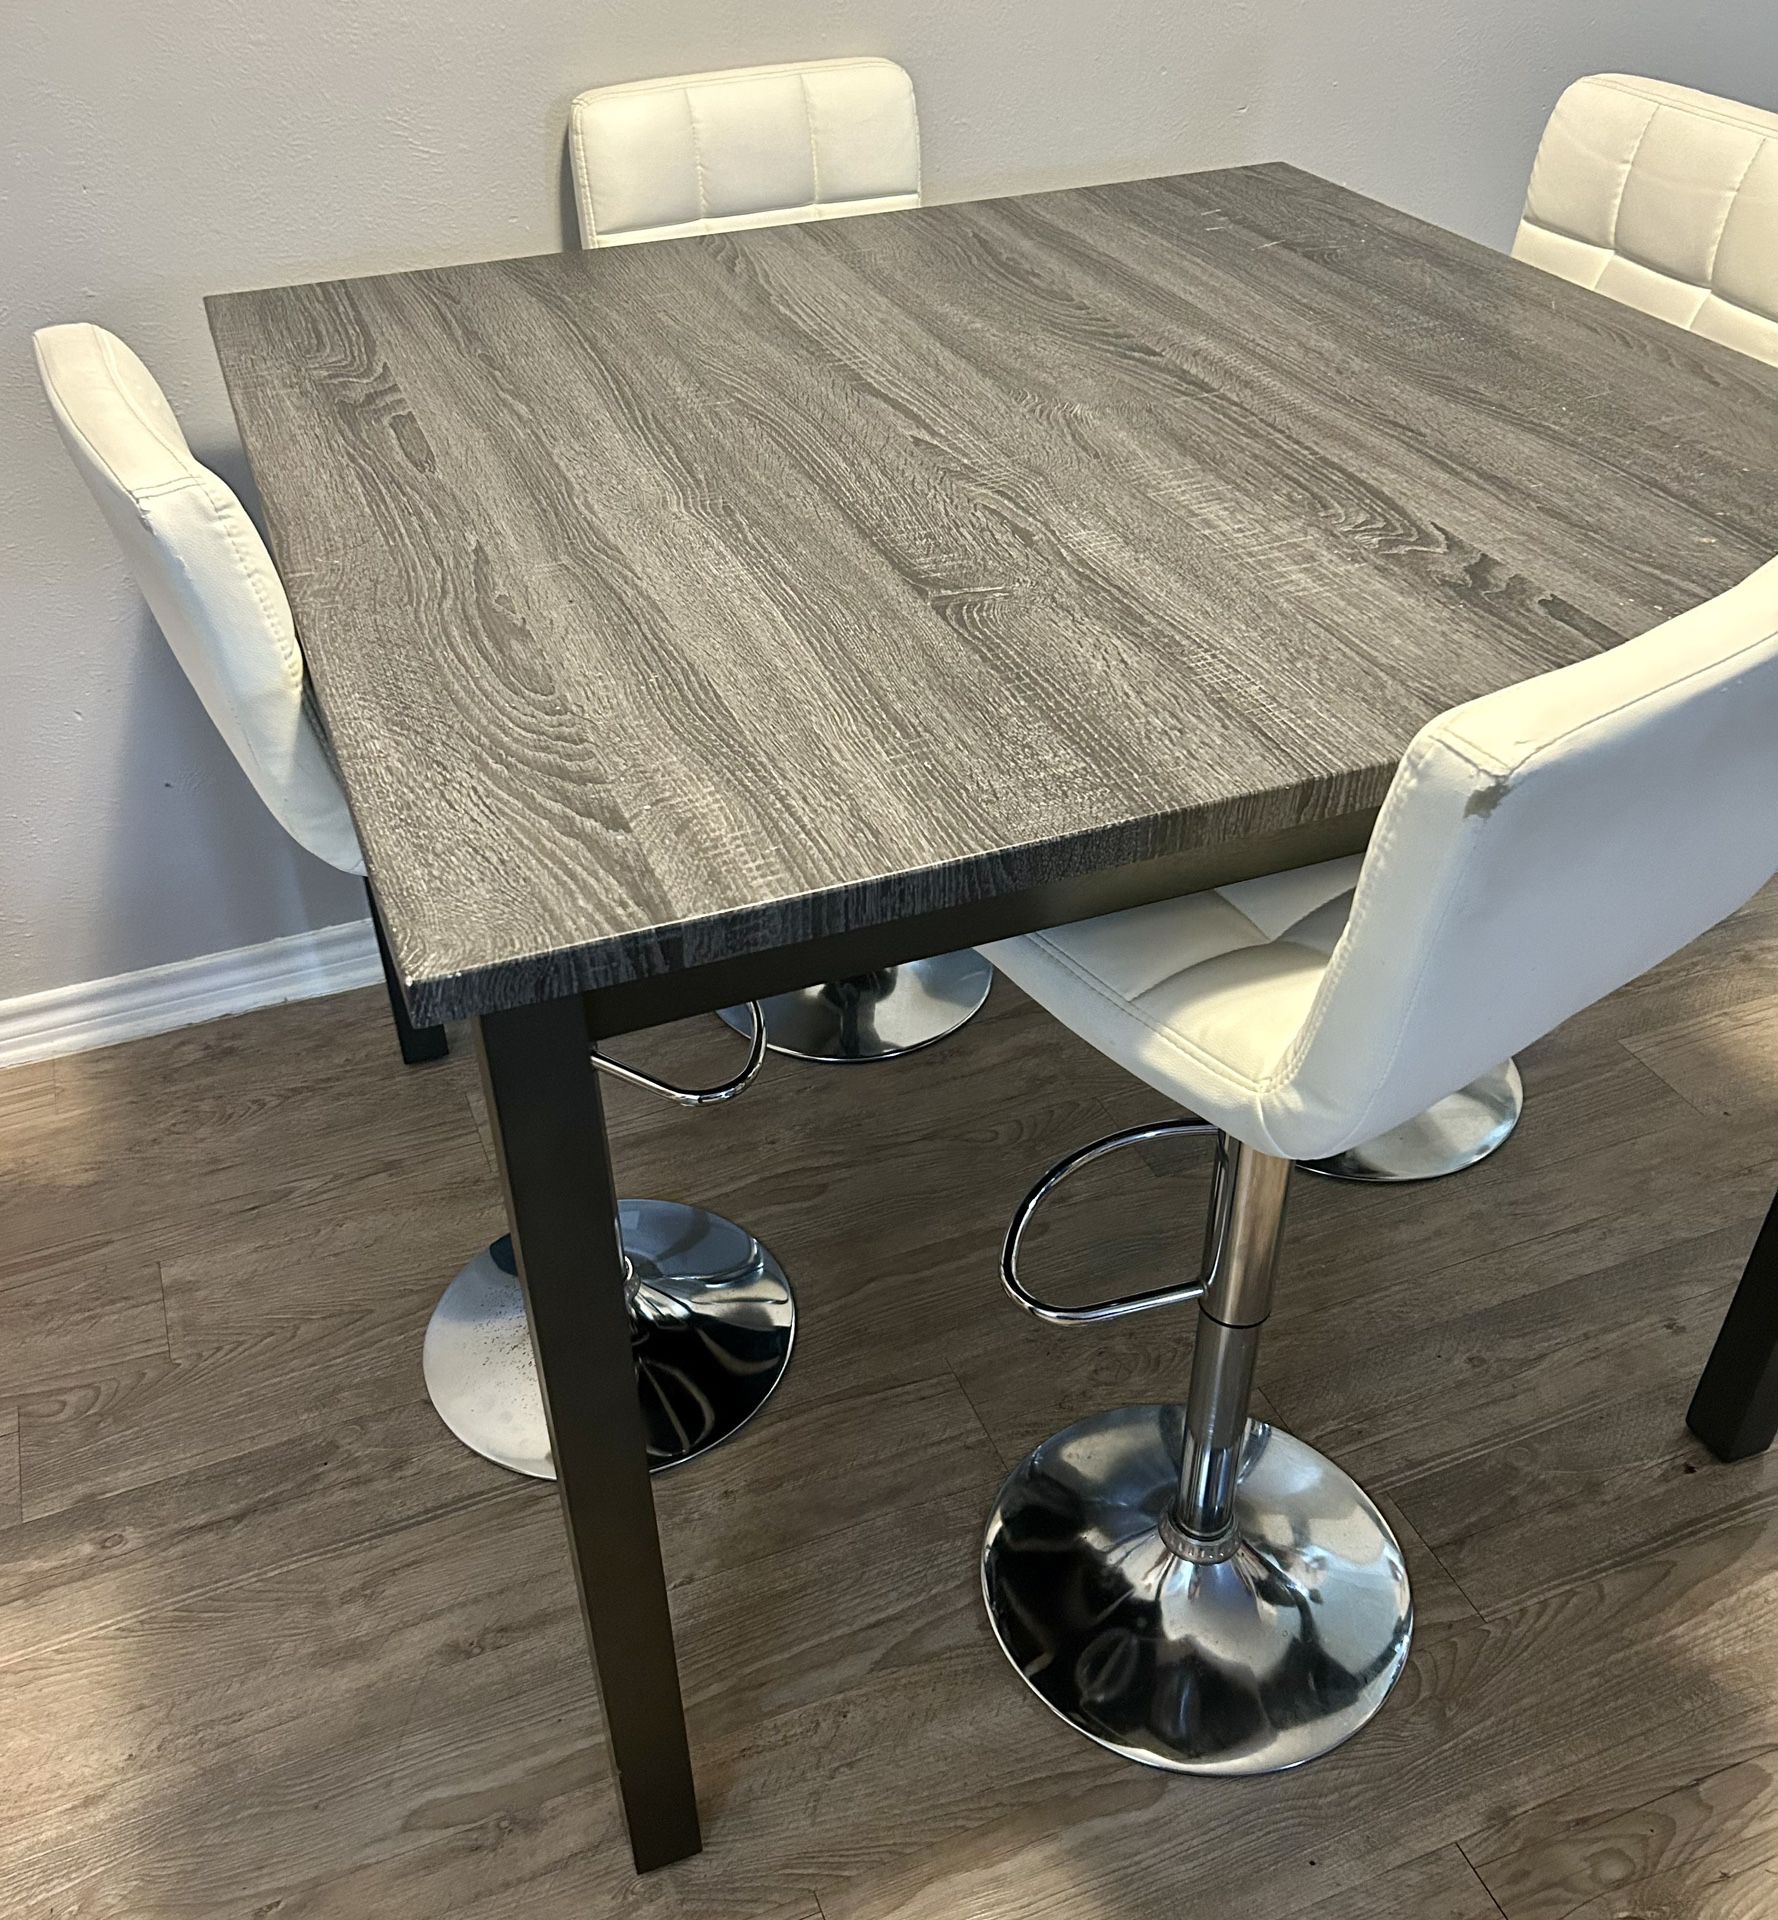 Tall Kitchen table/4 Leather Stools